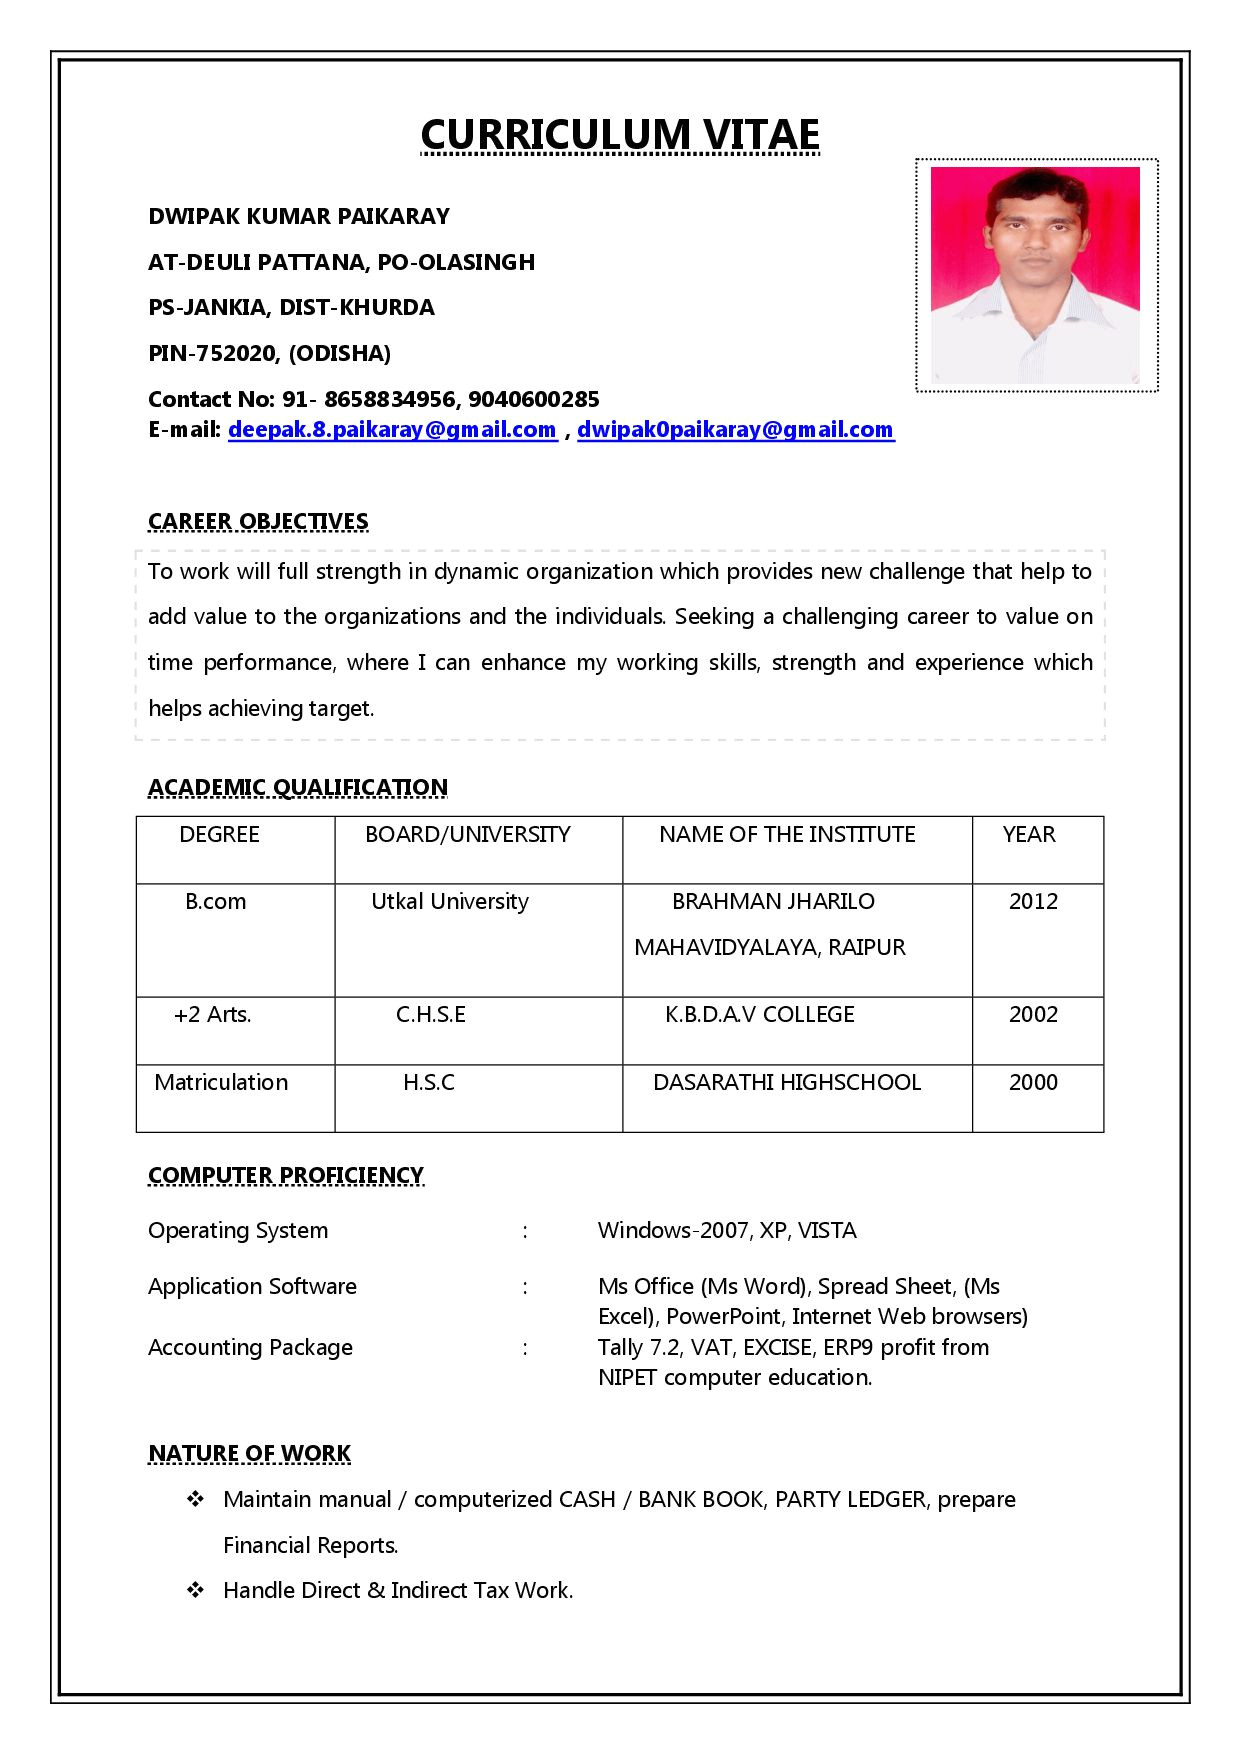 A Simple Resume format for Job Job Interview 3 Resume format Job Resume format